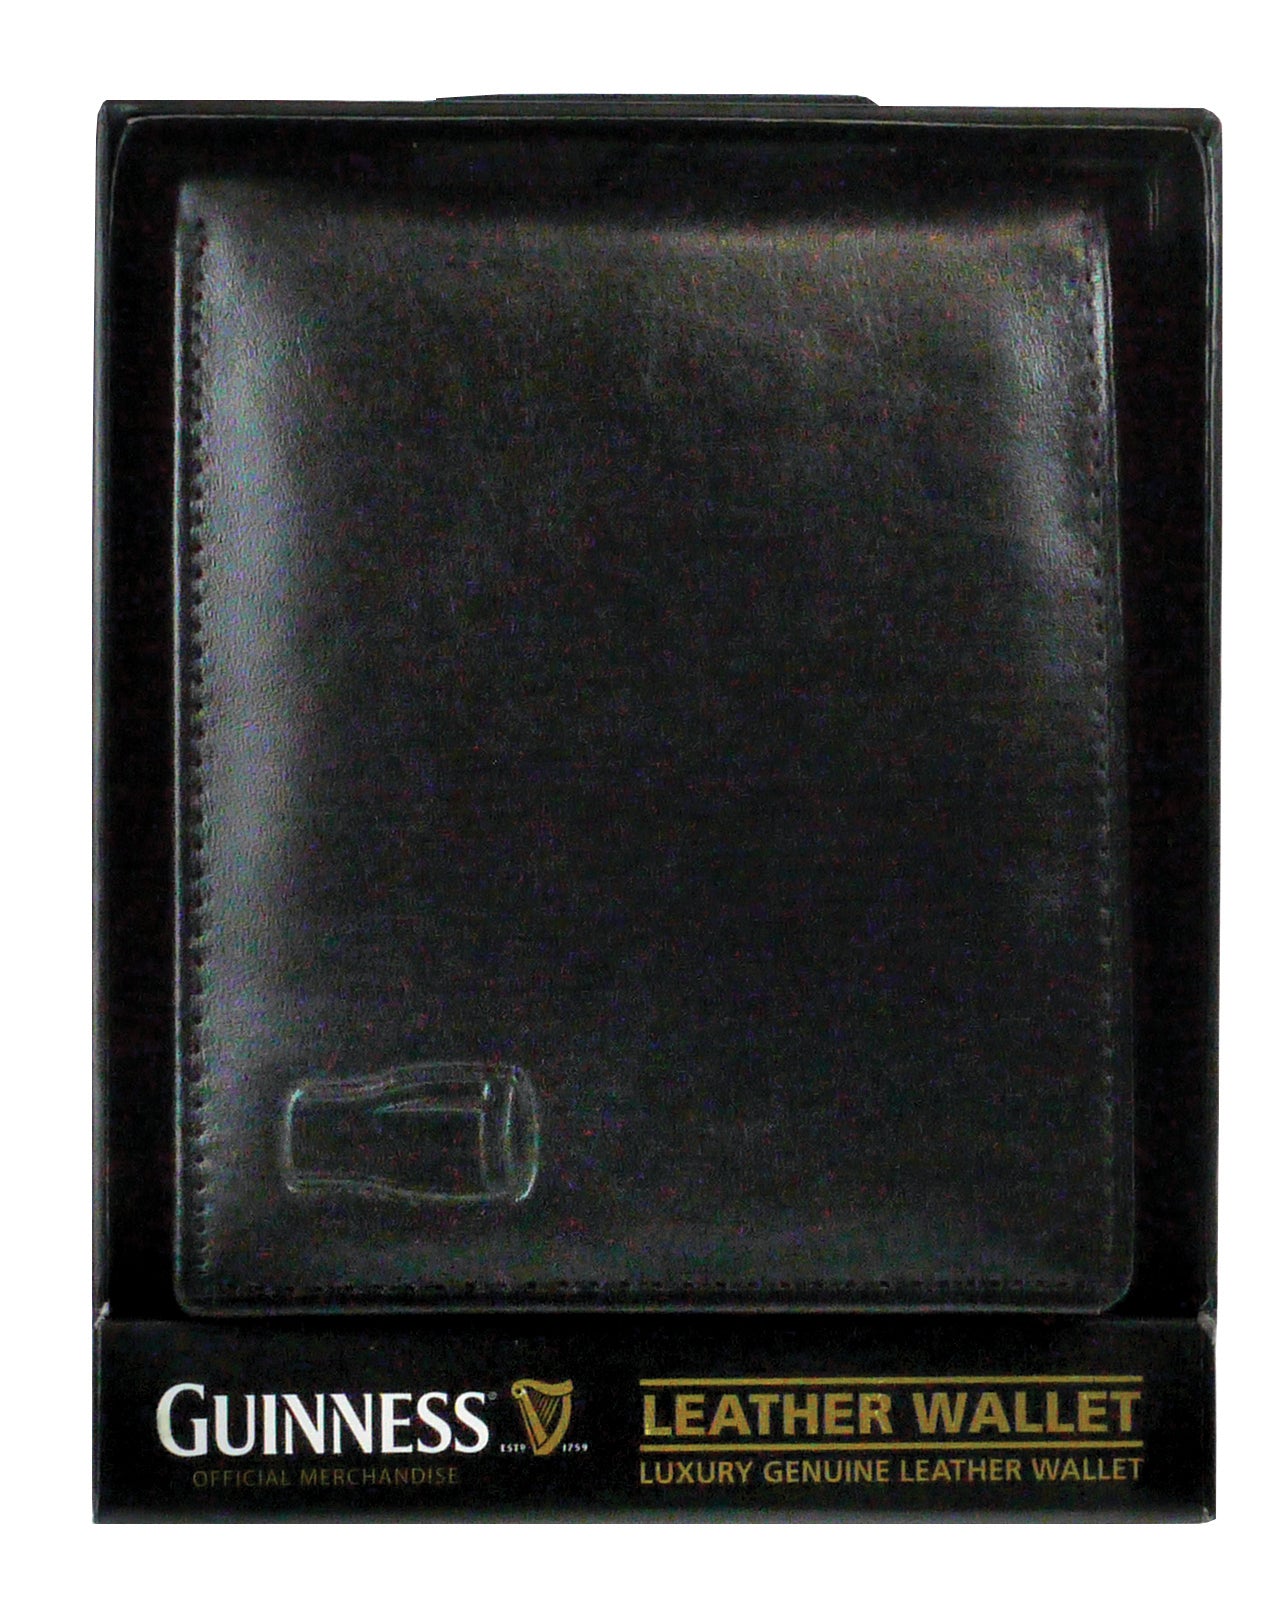 Guinness Classic Wallet